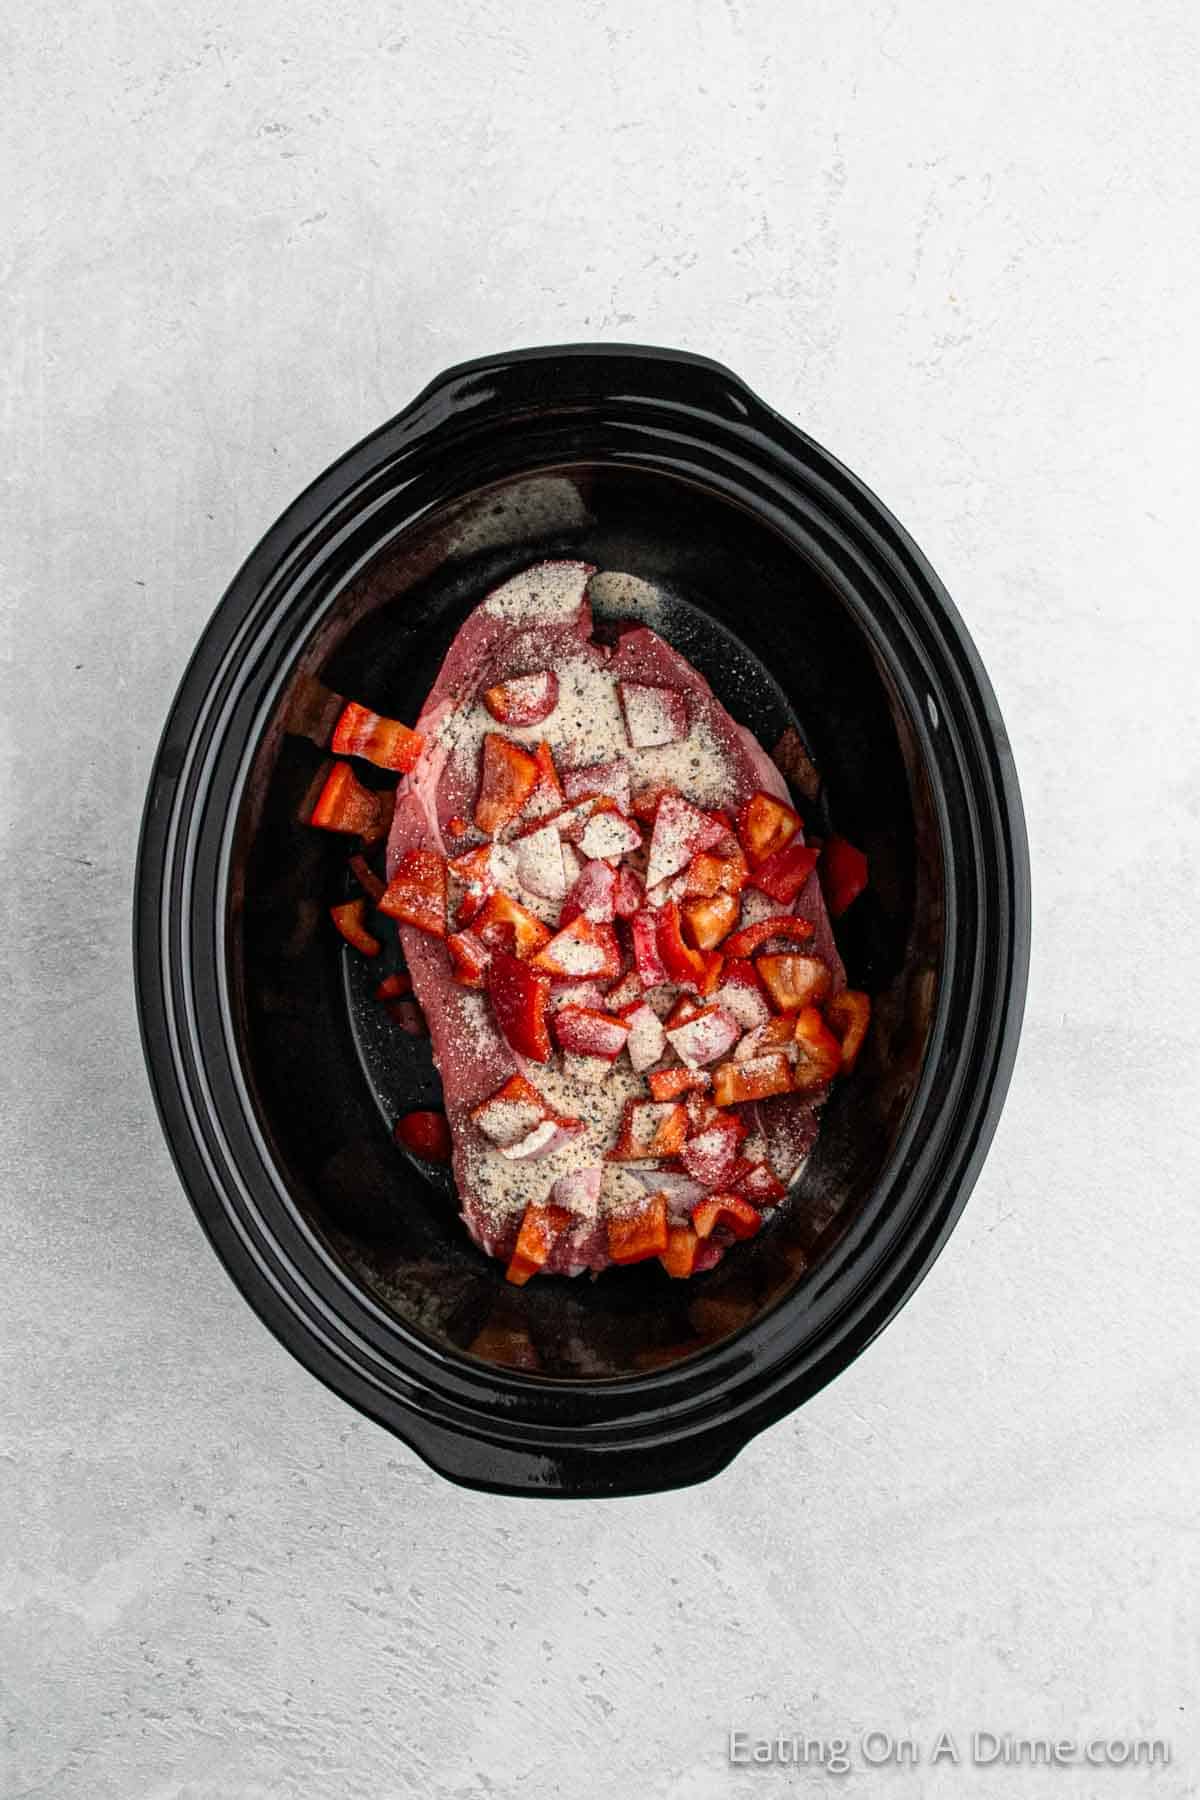 Place the roast in the slow cooker topped with seasoning packet and red bell pepper